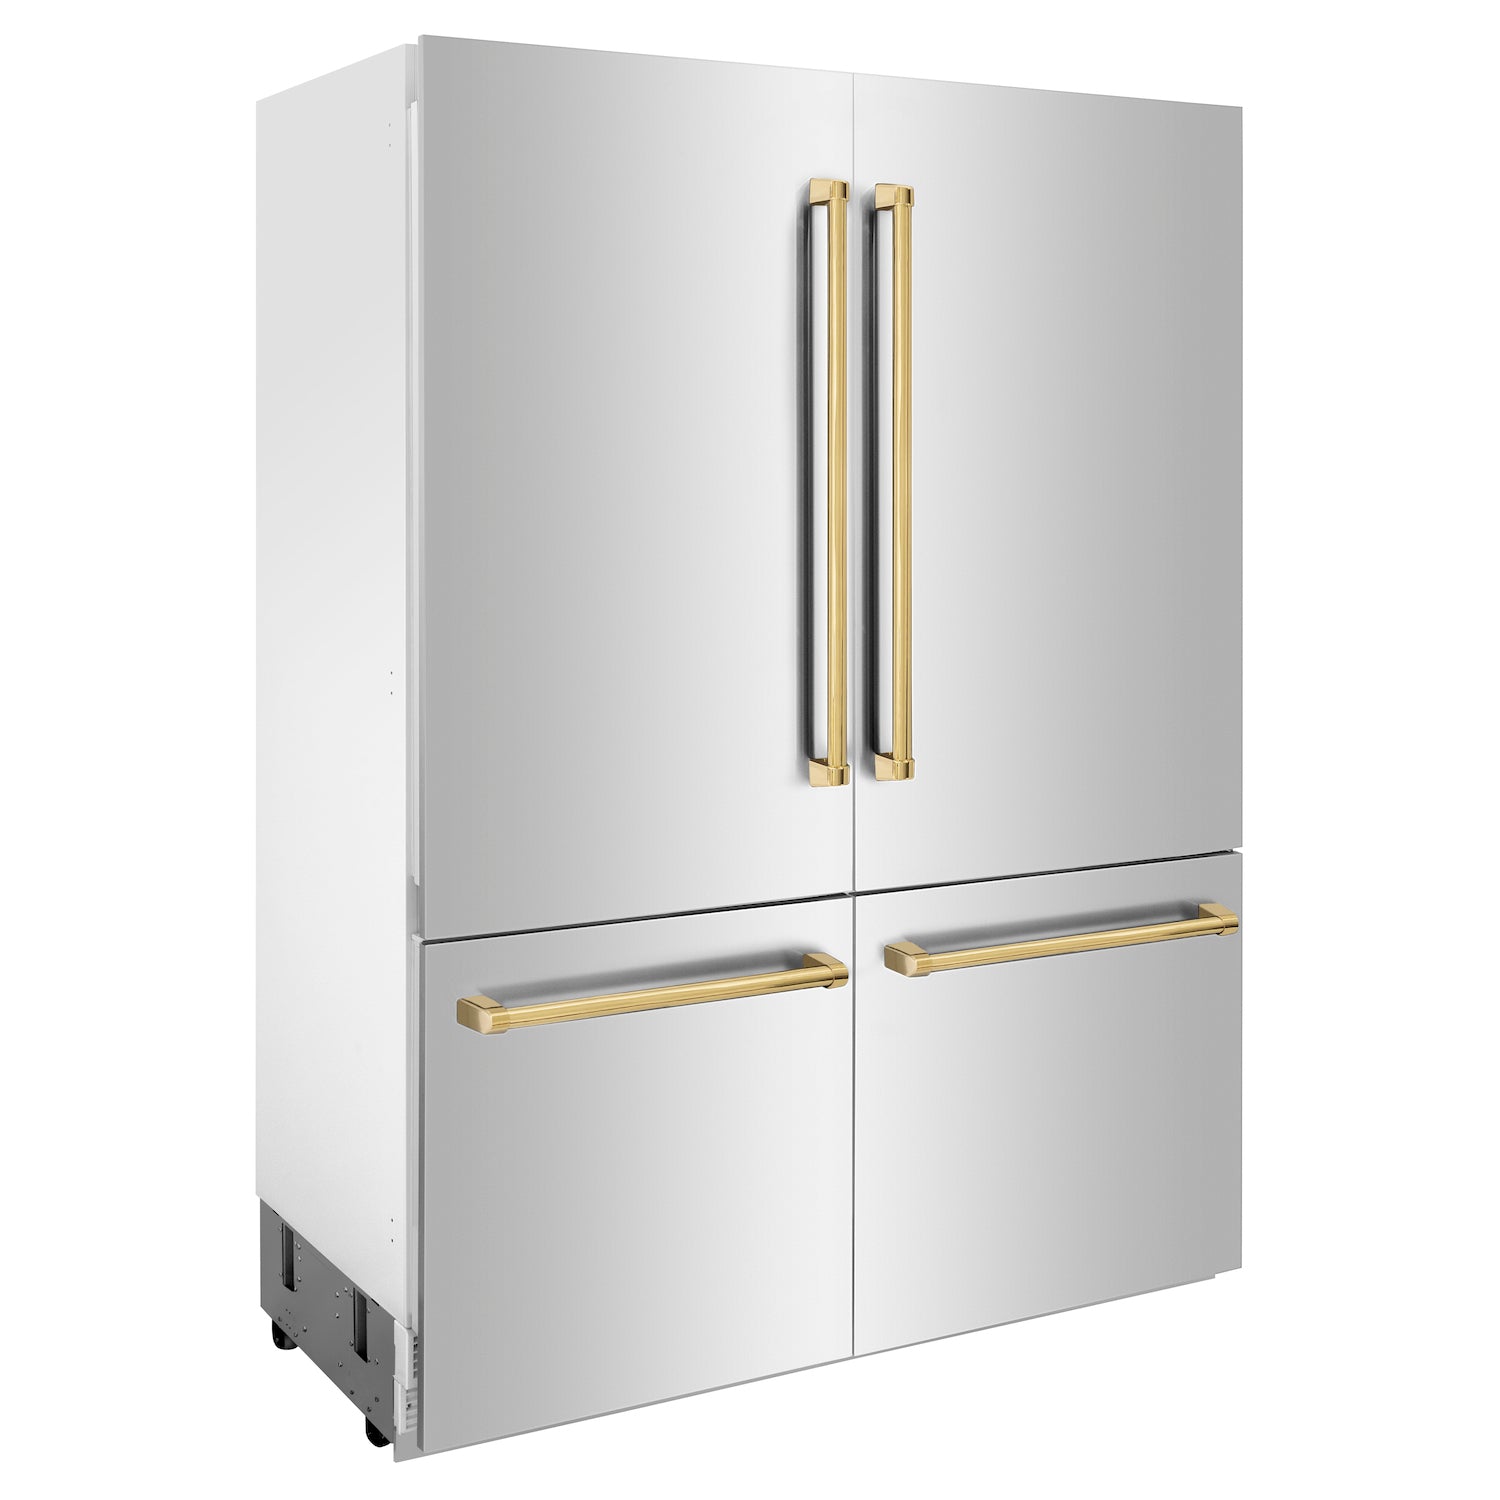 ZLINE Autograph Edition 60 in. 32.2 cu. ft. Built-in 4-Door French Door Refrigerator with Internal Water and Ice Dispenser in Stainless Steel with Polished Gold Accents (RBIVZ-304-60-G) side, closed.